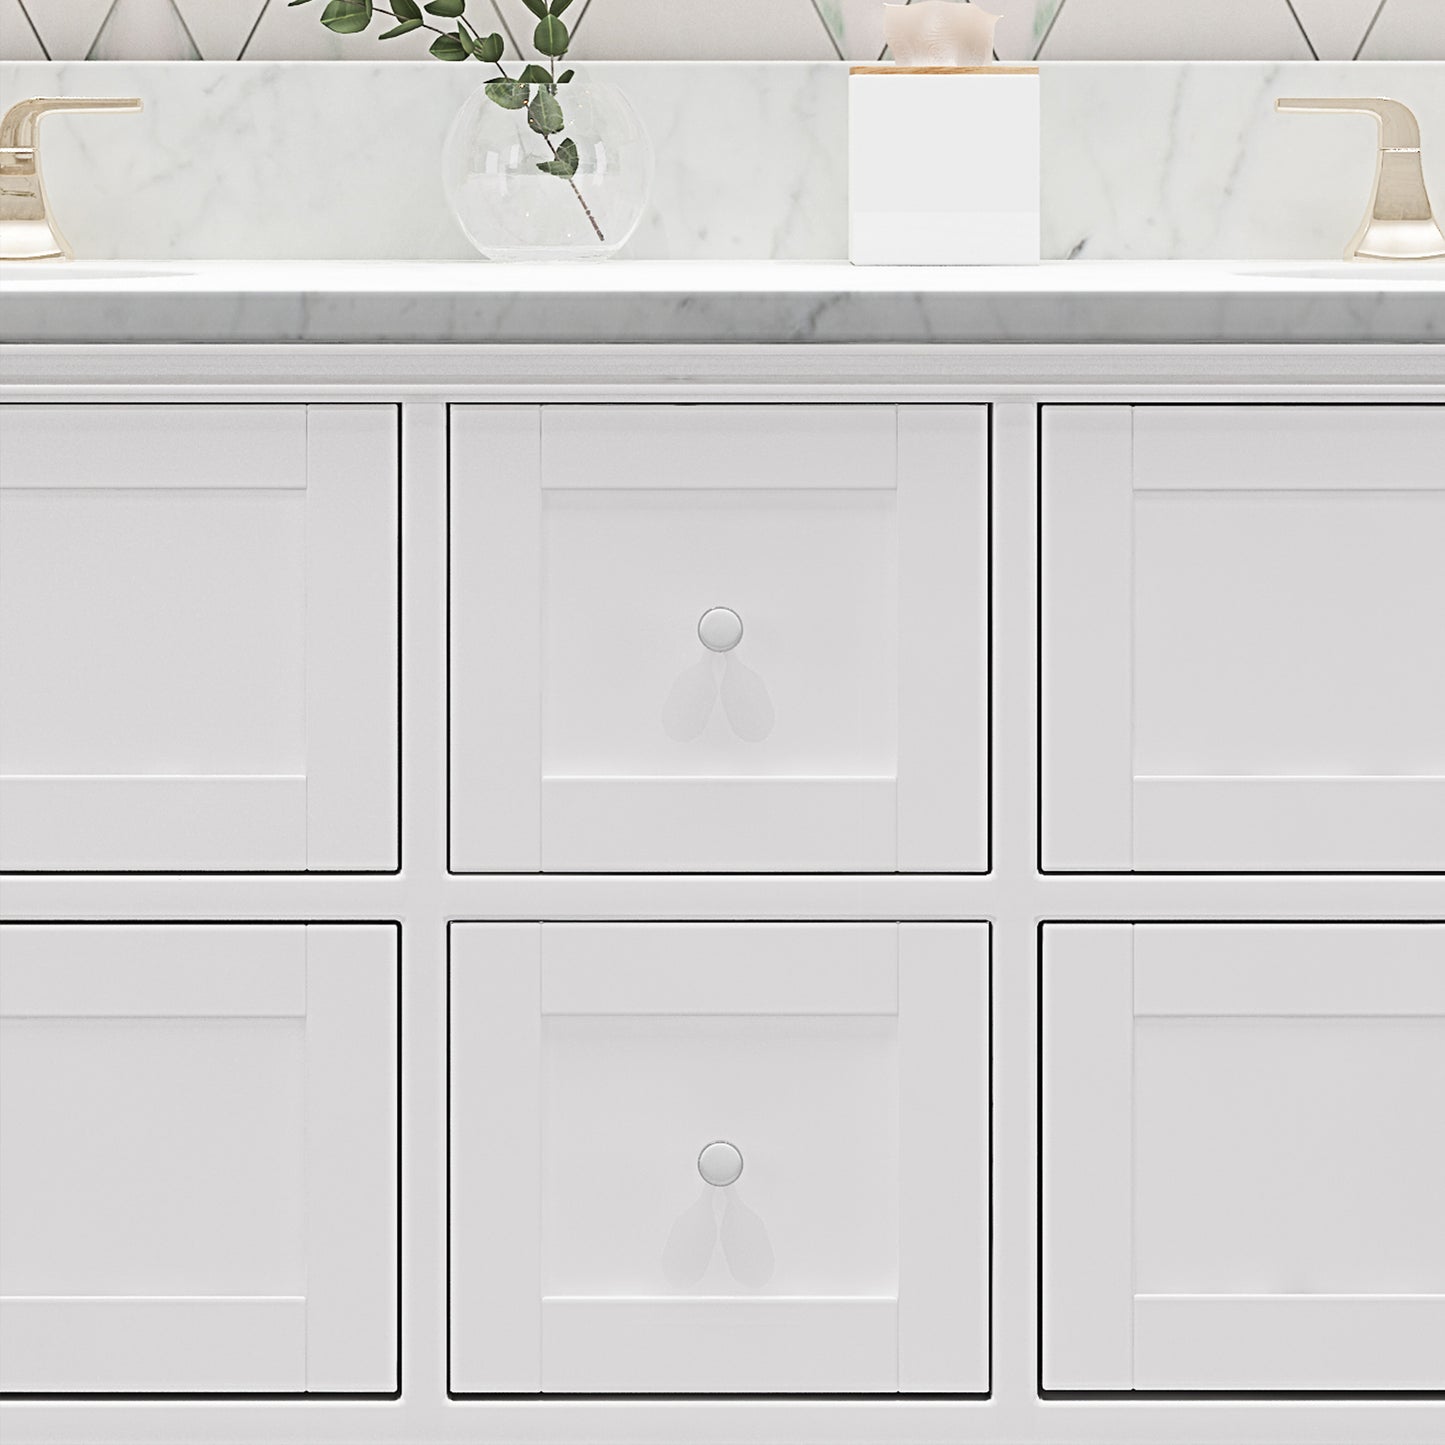 Douvier Contemporary 60" Wood Double Sink Bathroom Vanity with Marble Counter Top with Carrara White Marble